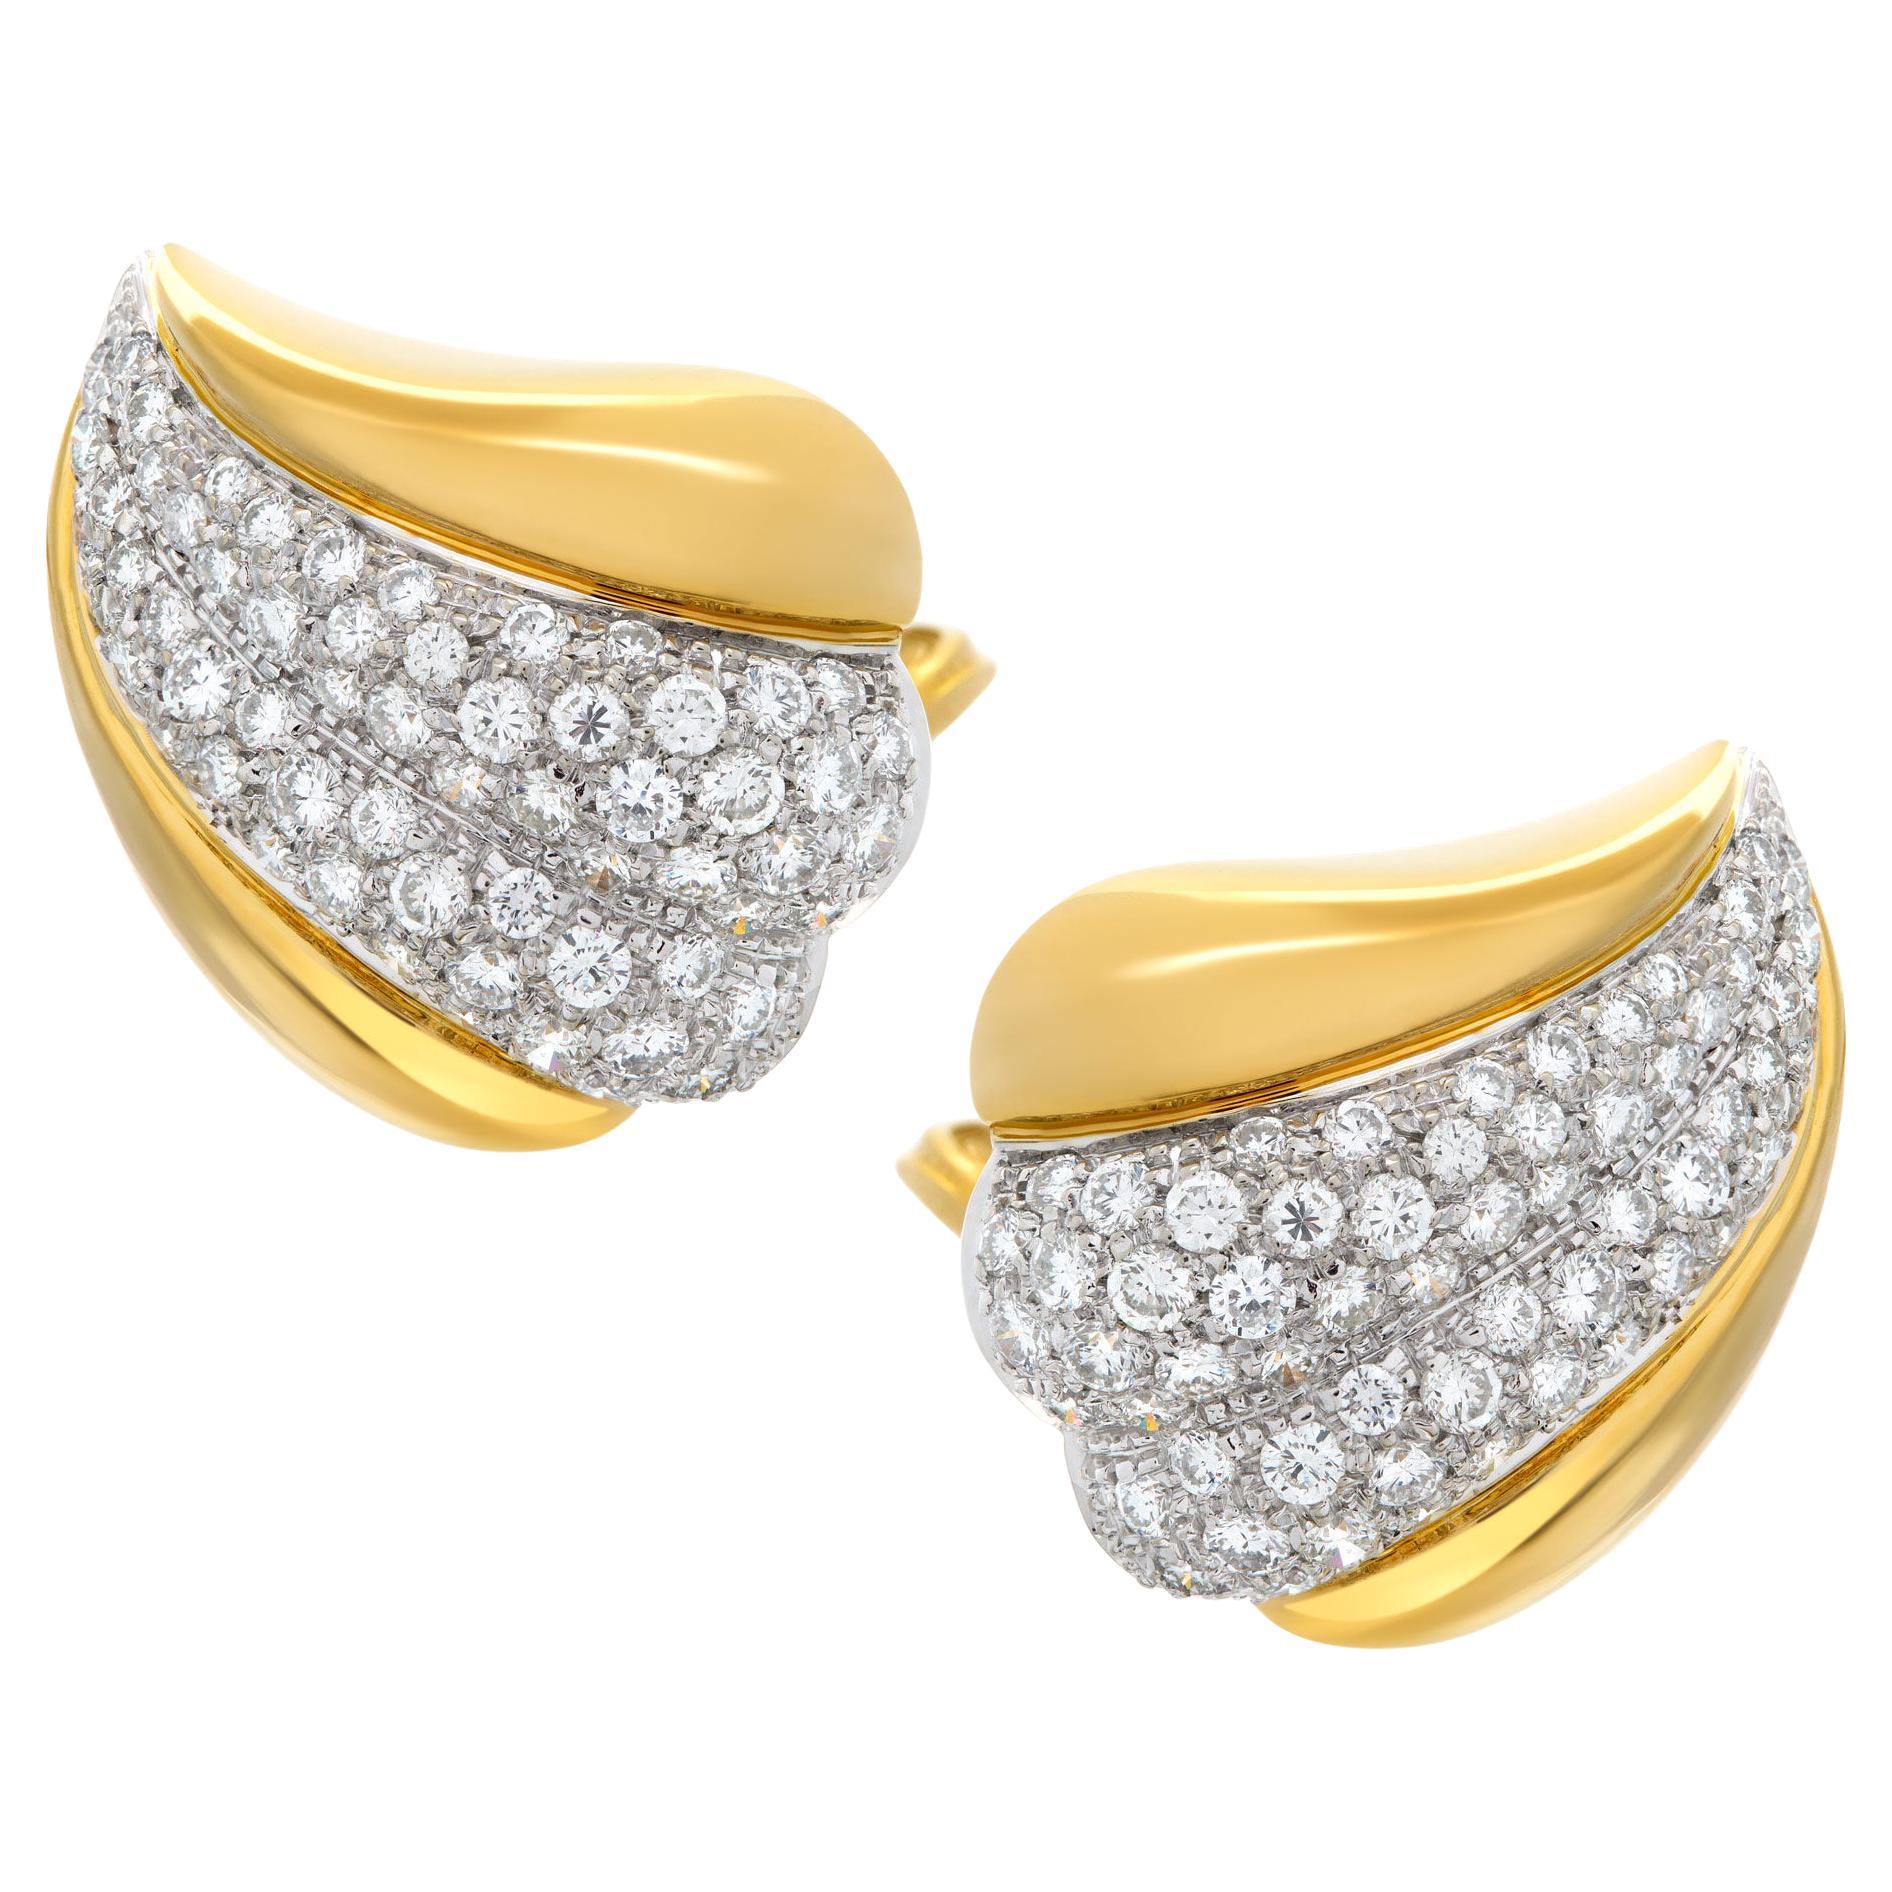 Diamond Earrings Set in 18k Yellow Gold with over 2.15 Carats in Diamonds For Sale